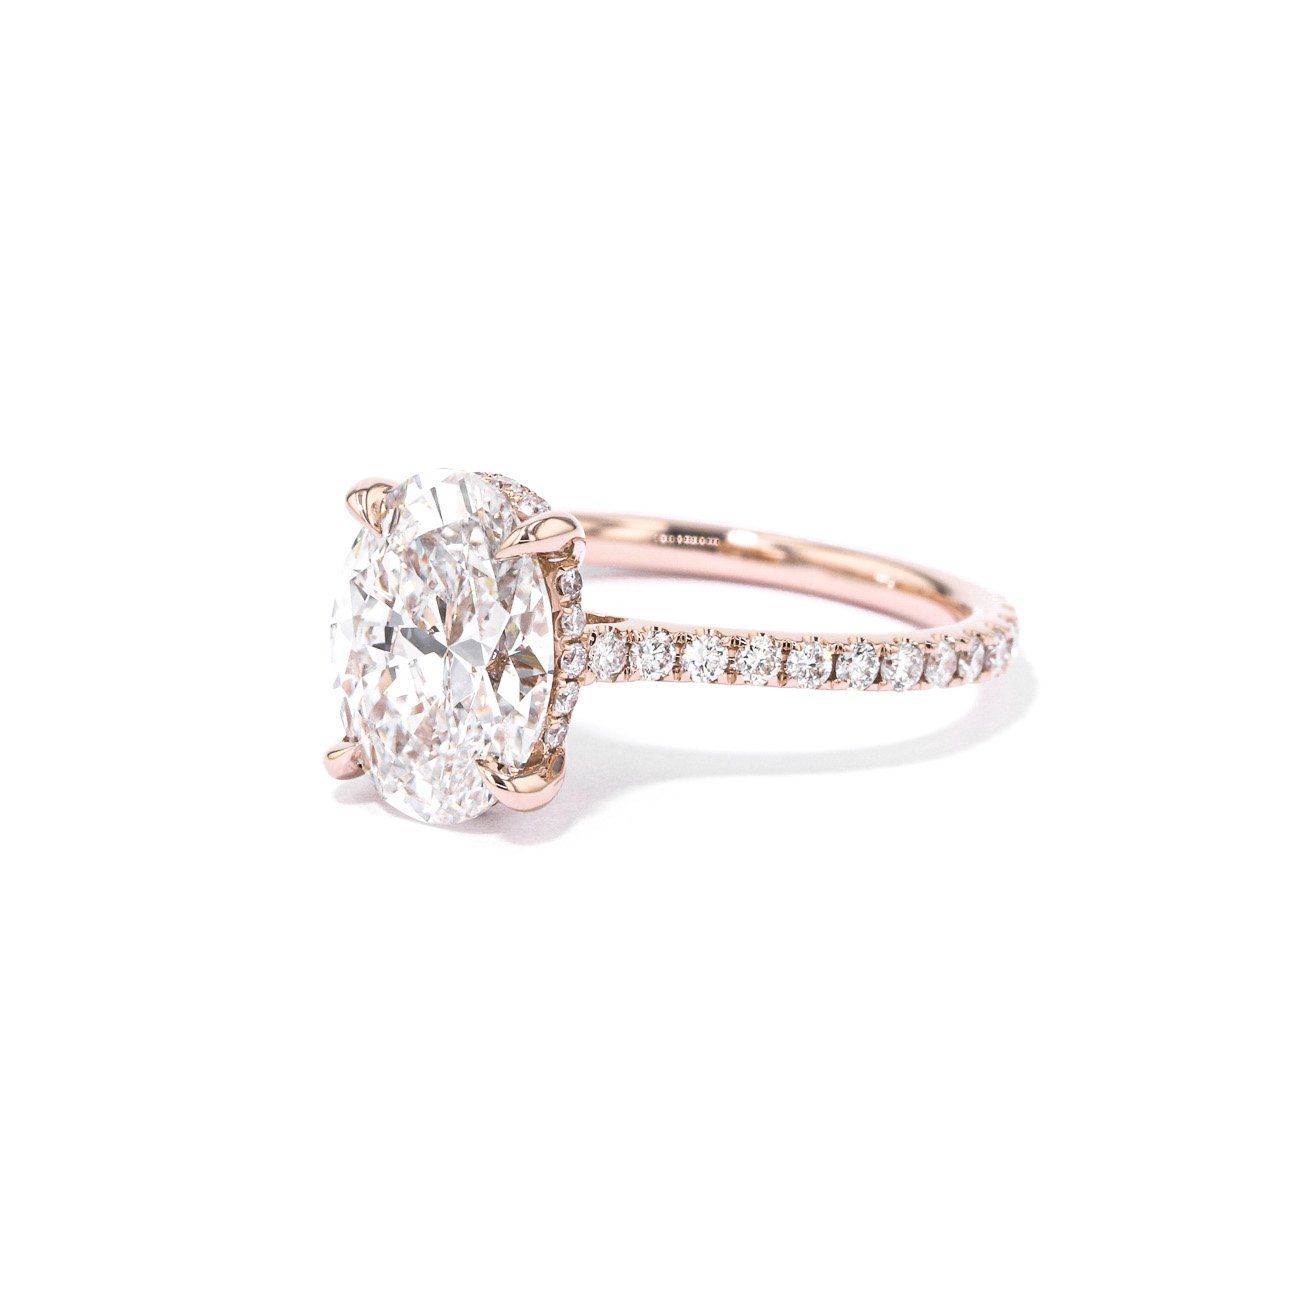 Oval cut diamond engagement ring in rose gold